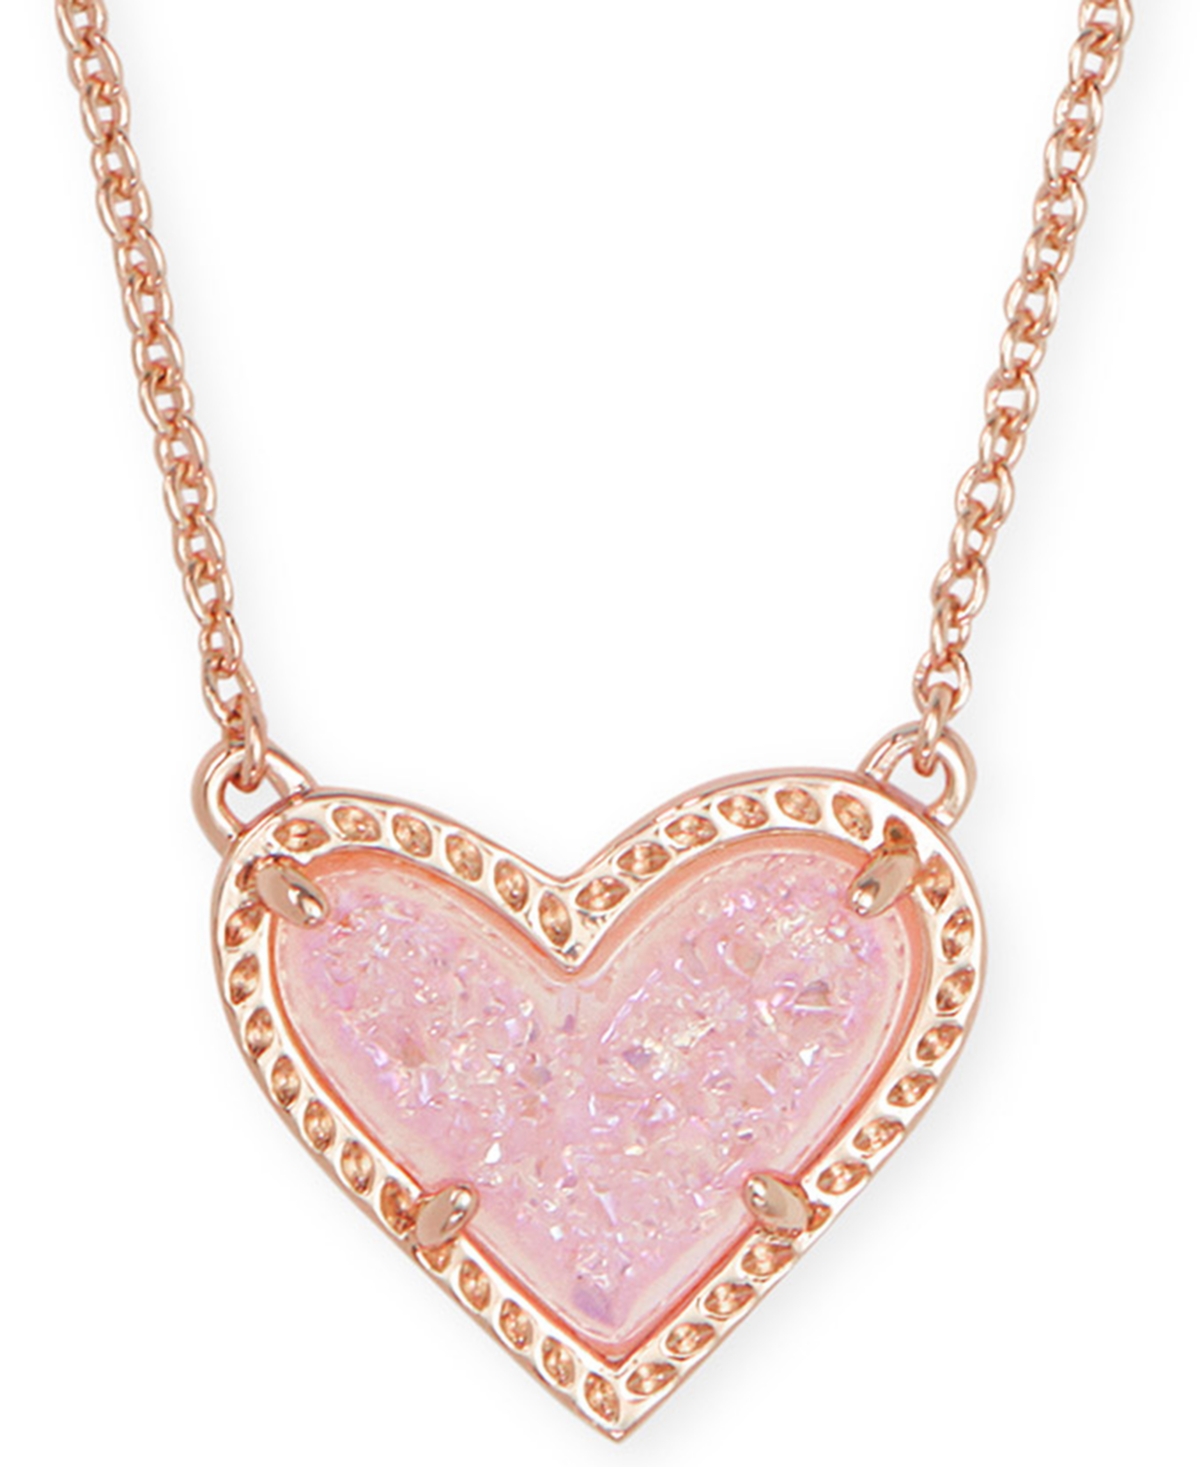 14K Gold Plated and Genuine Stone Kendra Scott Ari Heart Pendant Necklace - Pink Drusy